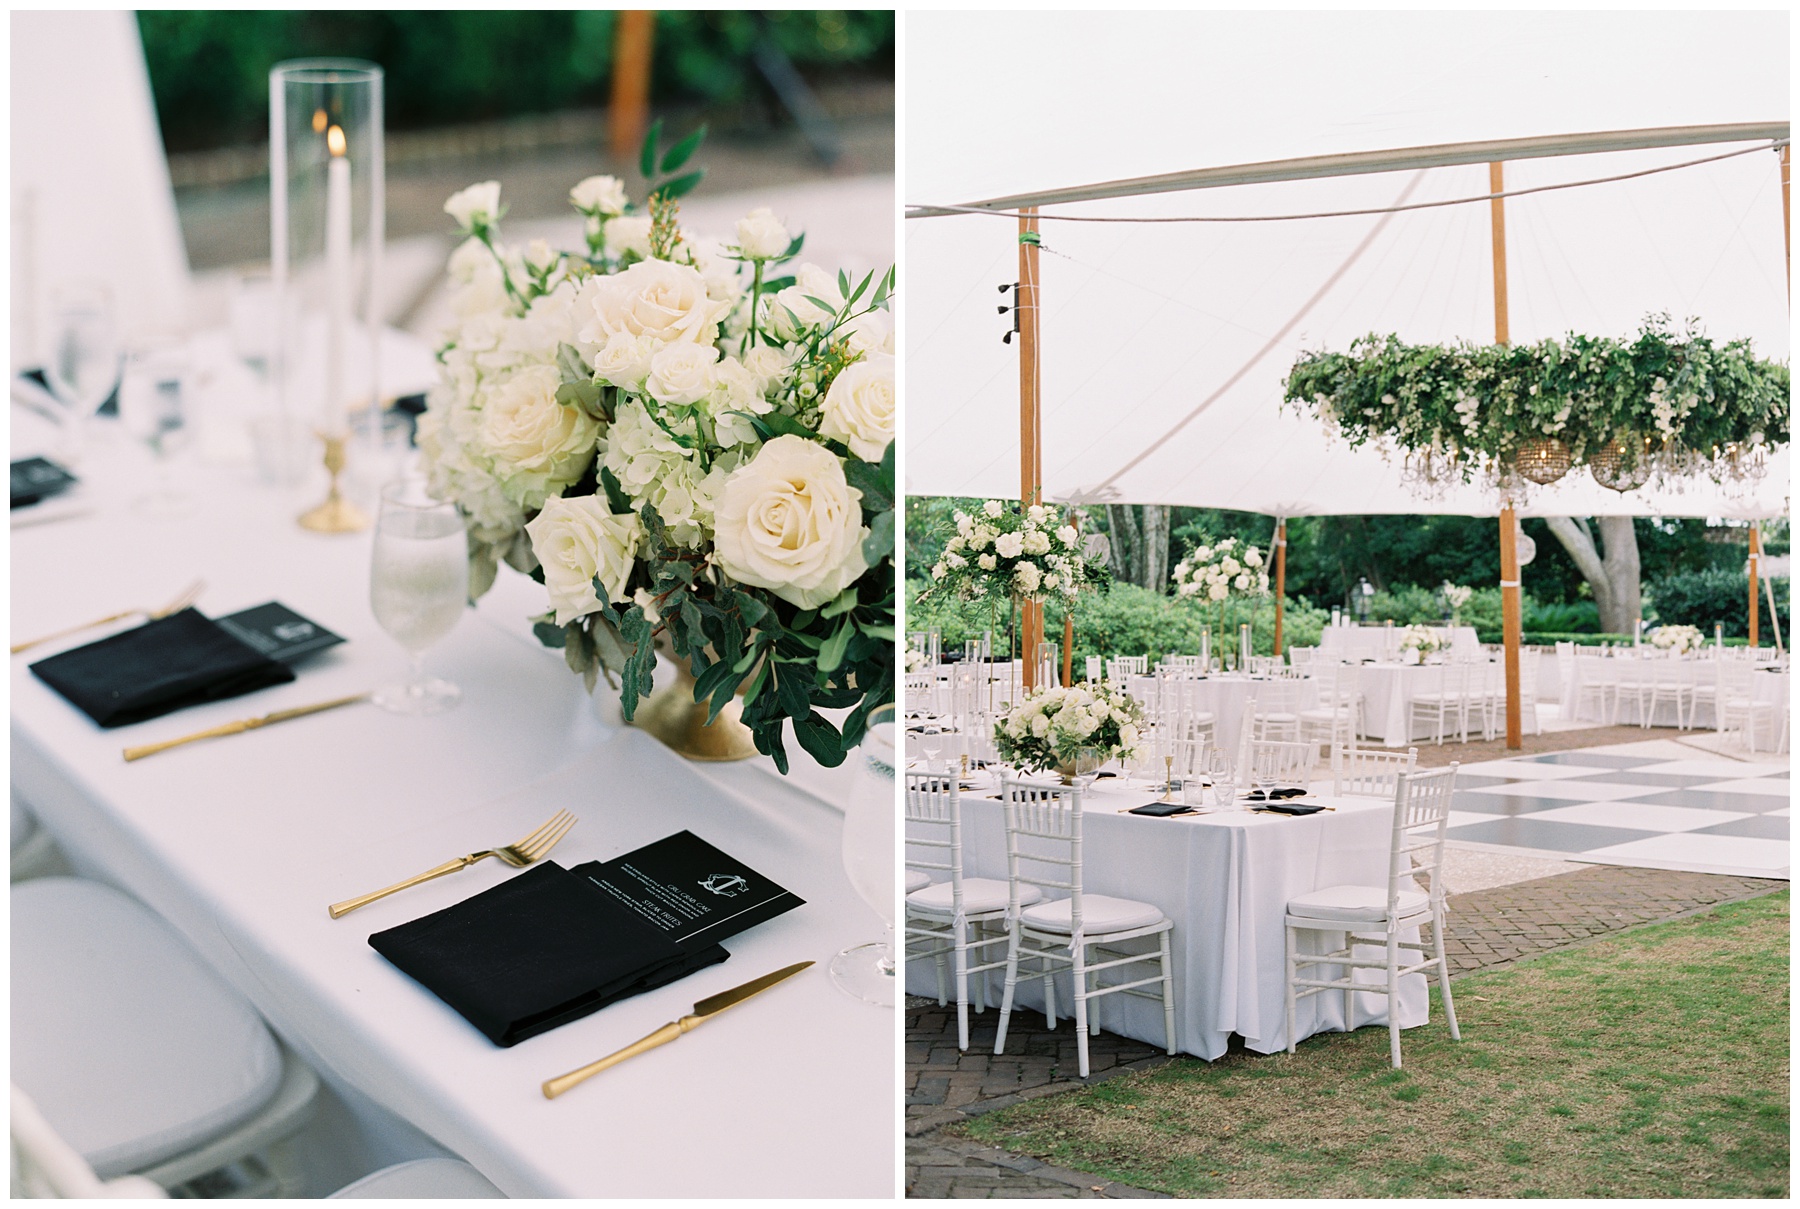 elegant black, white, and gold reception details inside sailcloth tent at the Governor Thomas Bennett House